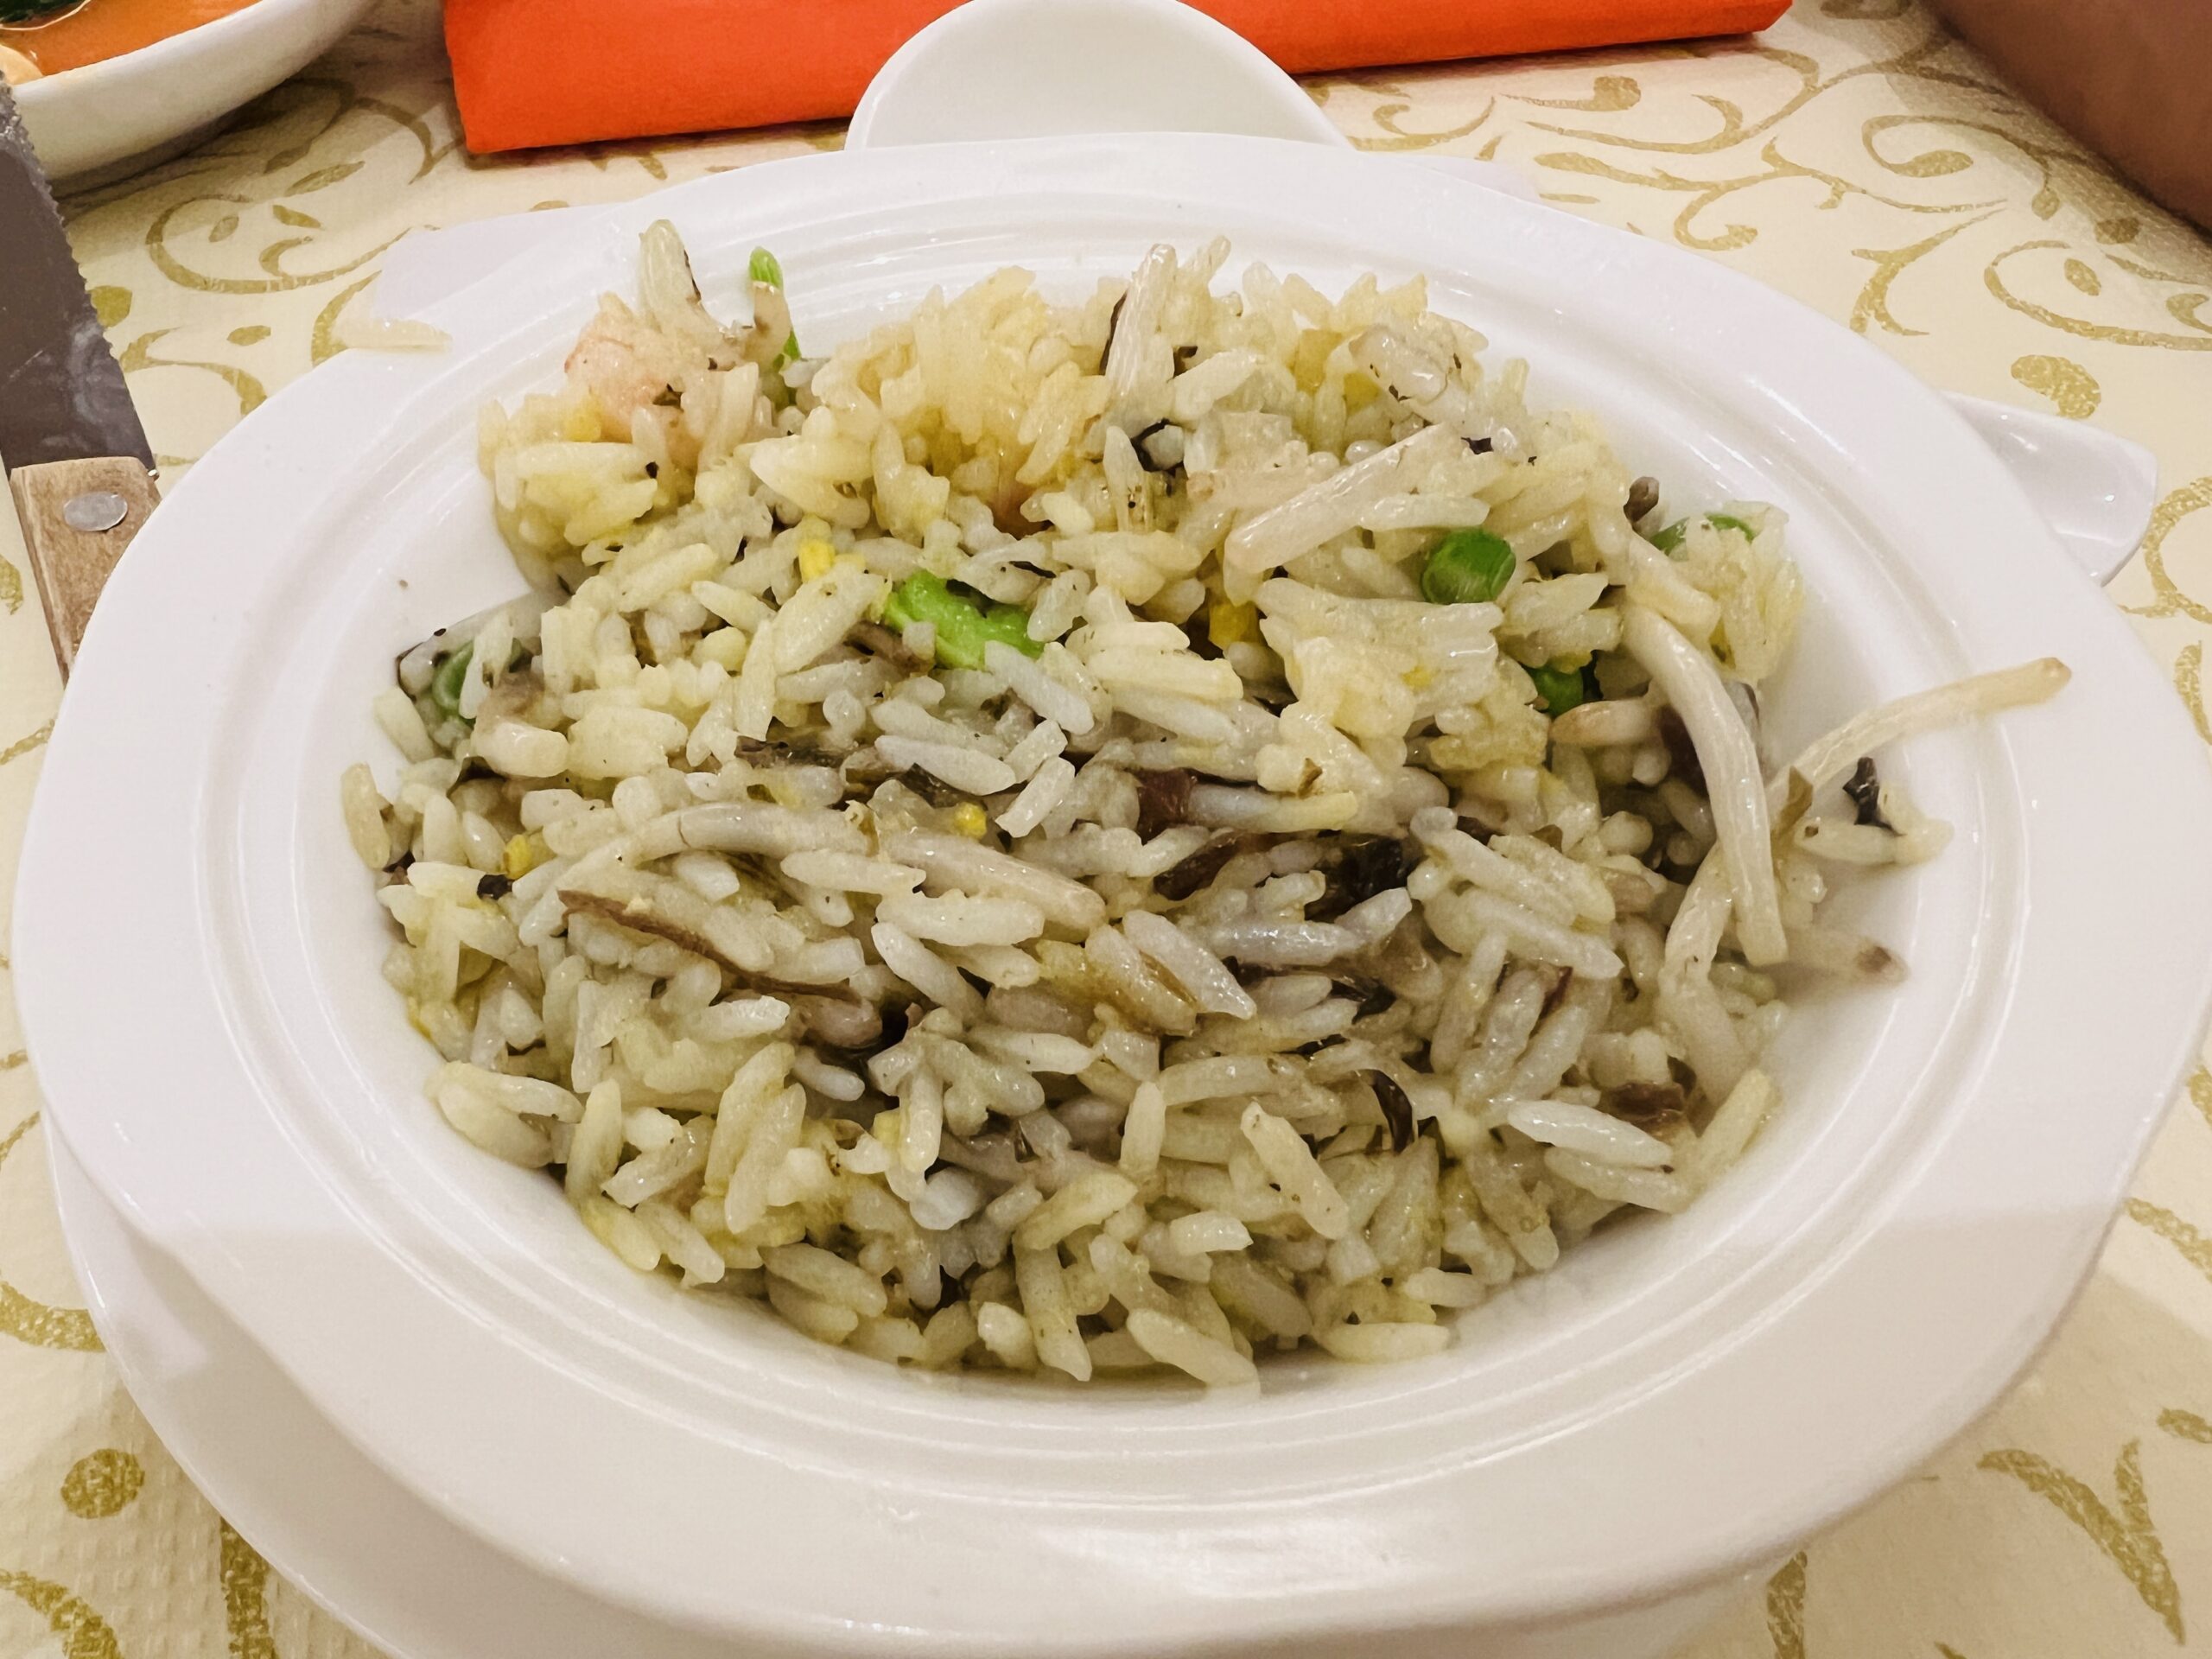 Imperial Restaurant - Olive Vegetable Fried Rice with Green Soya Beans